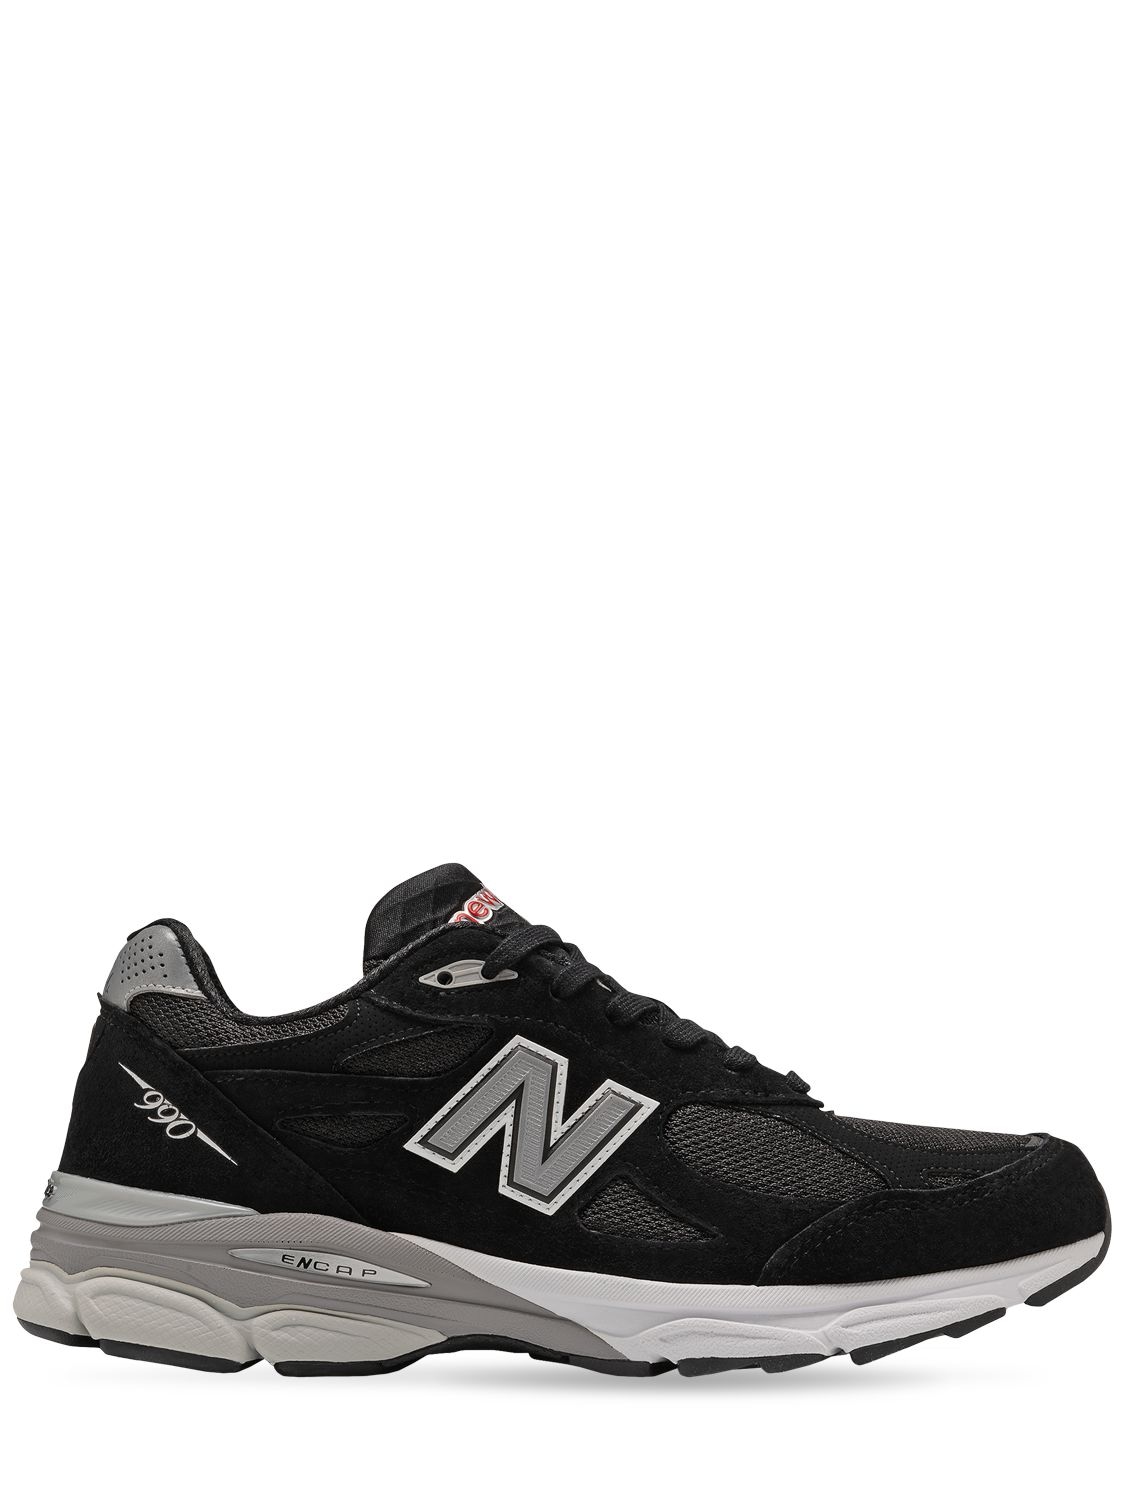 NEW BALANCE 990 V3 SNEAKERS